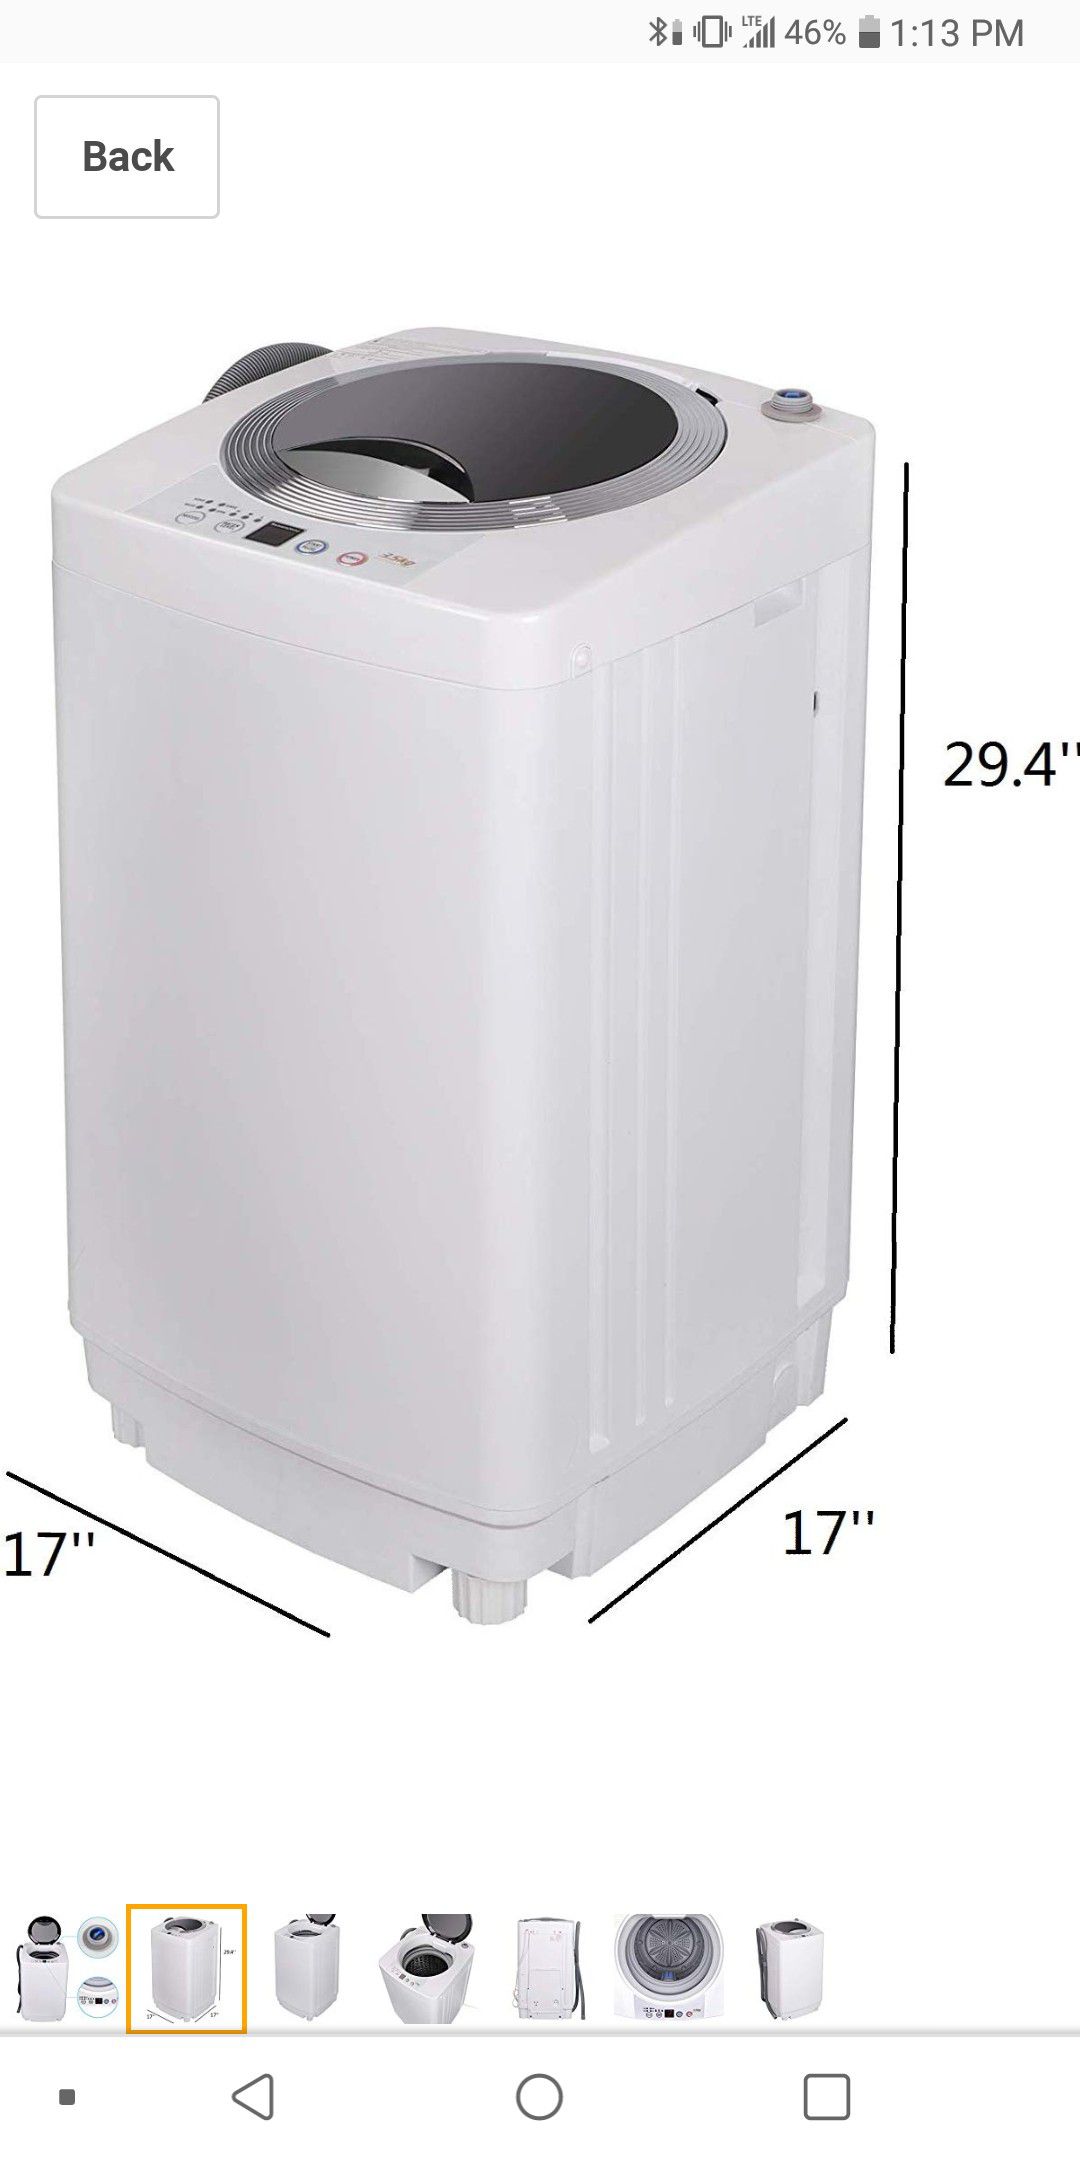 Day 44 - I Bought an Awesome Portable Washing Machine (Zeny HD-001)